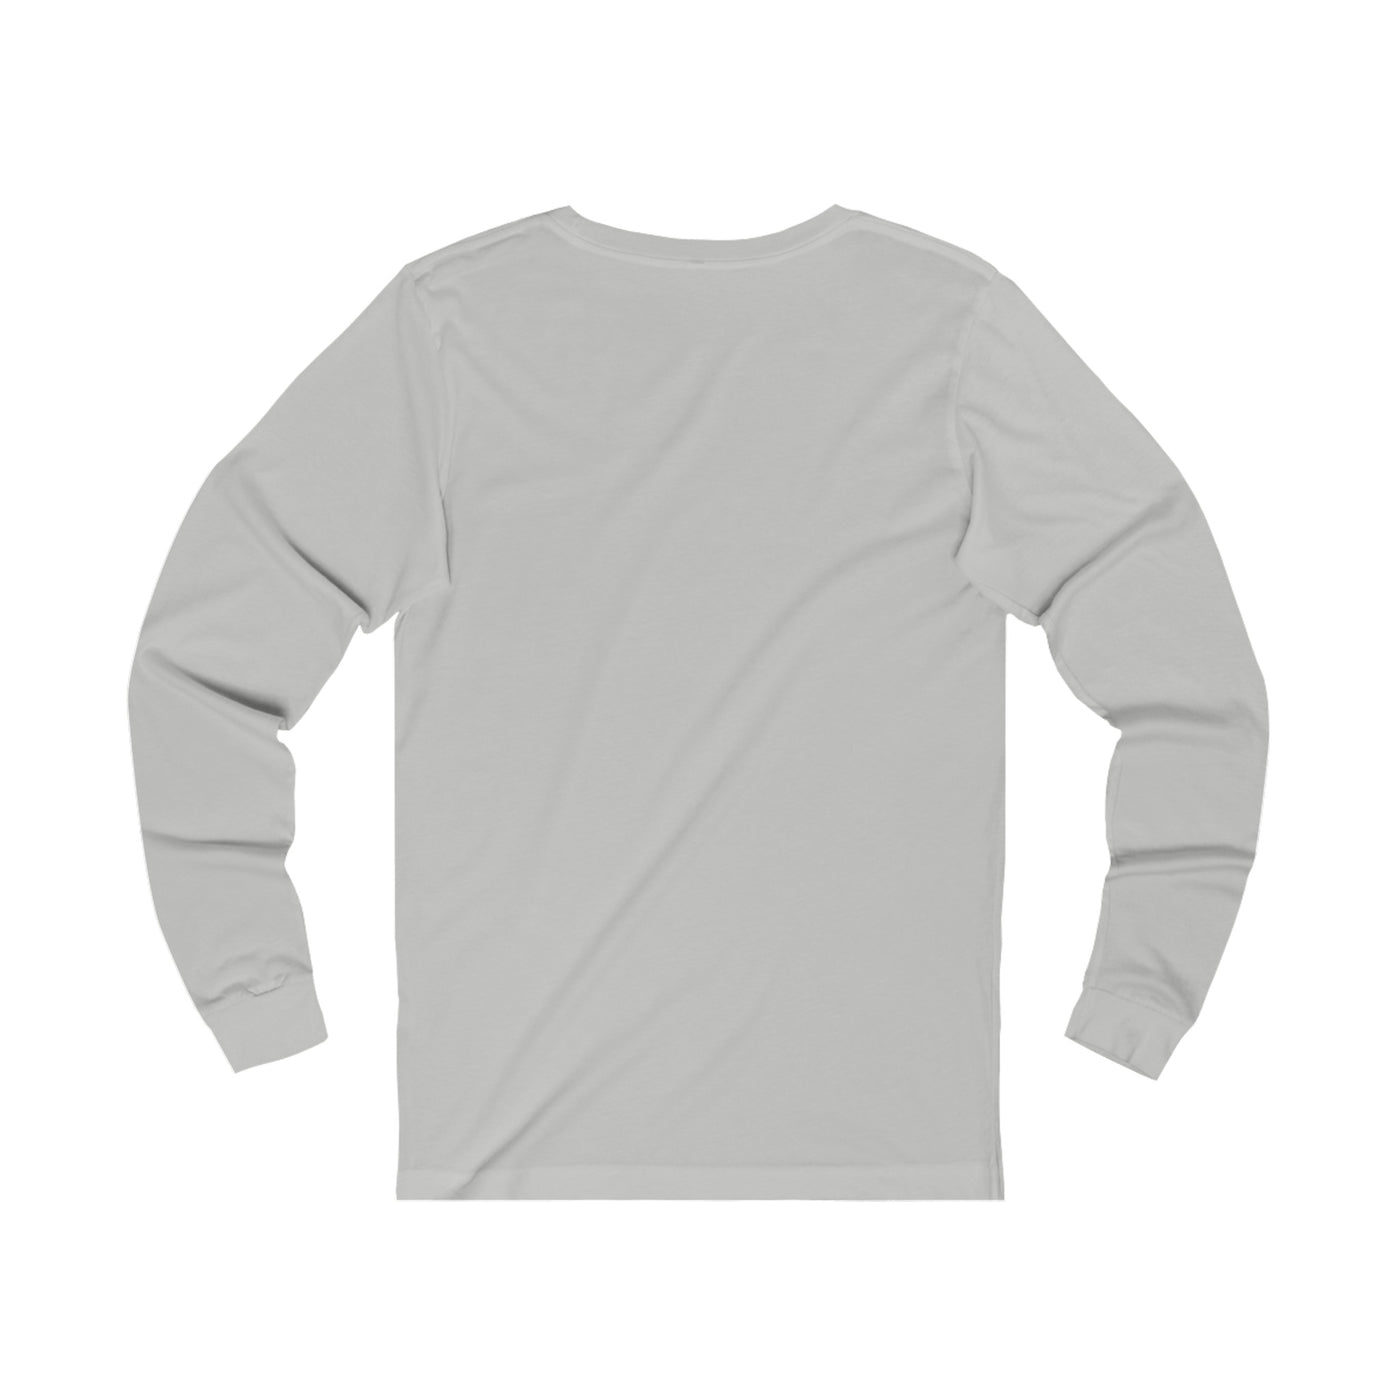 I need more space Unisex Jersey Long Sleeve Tee